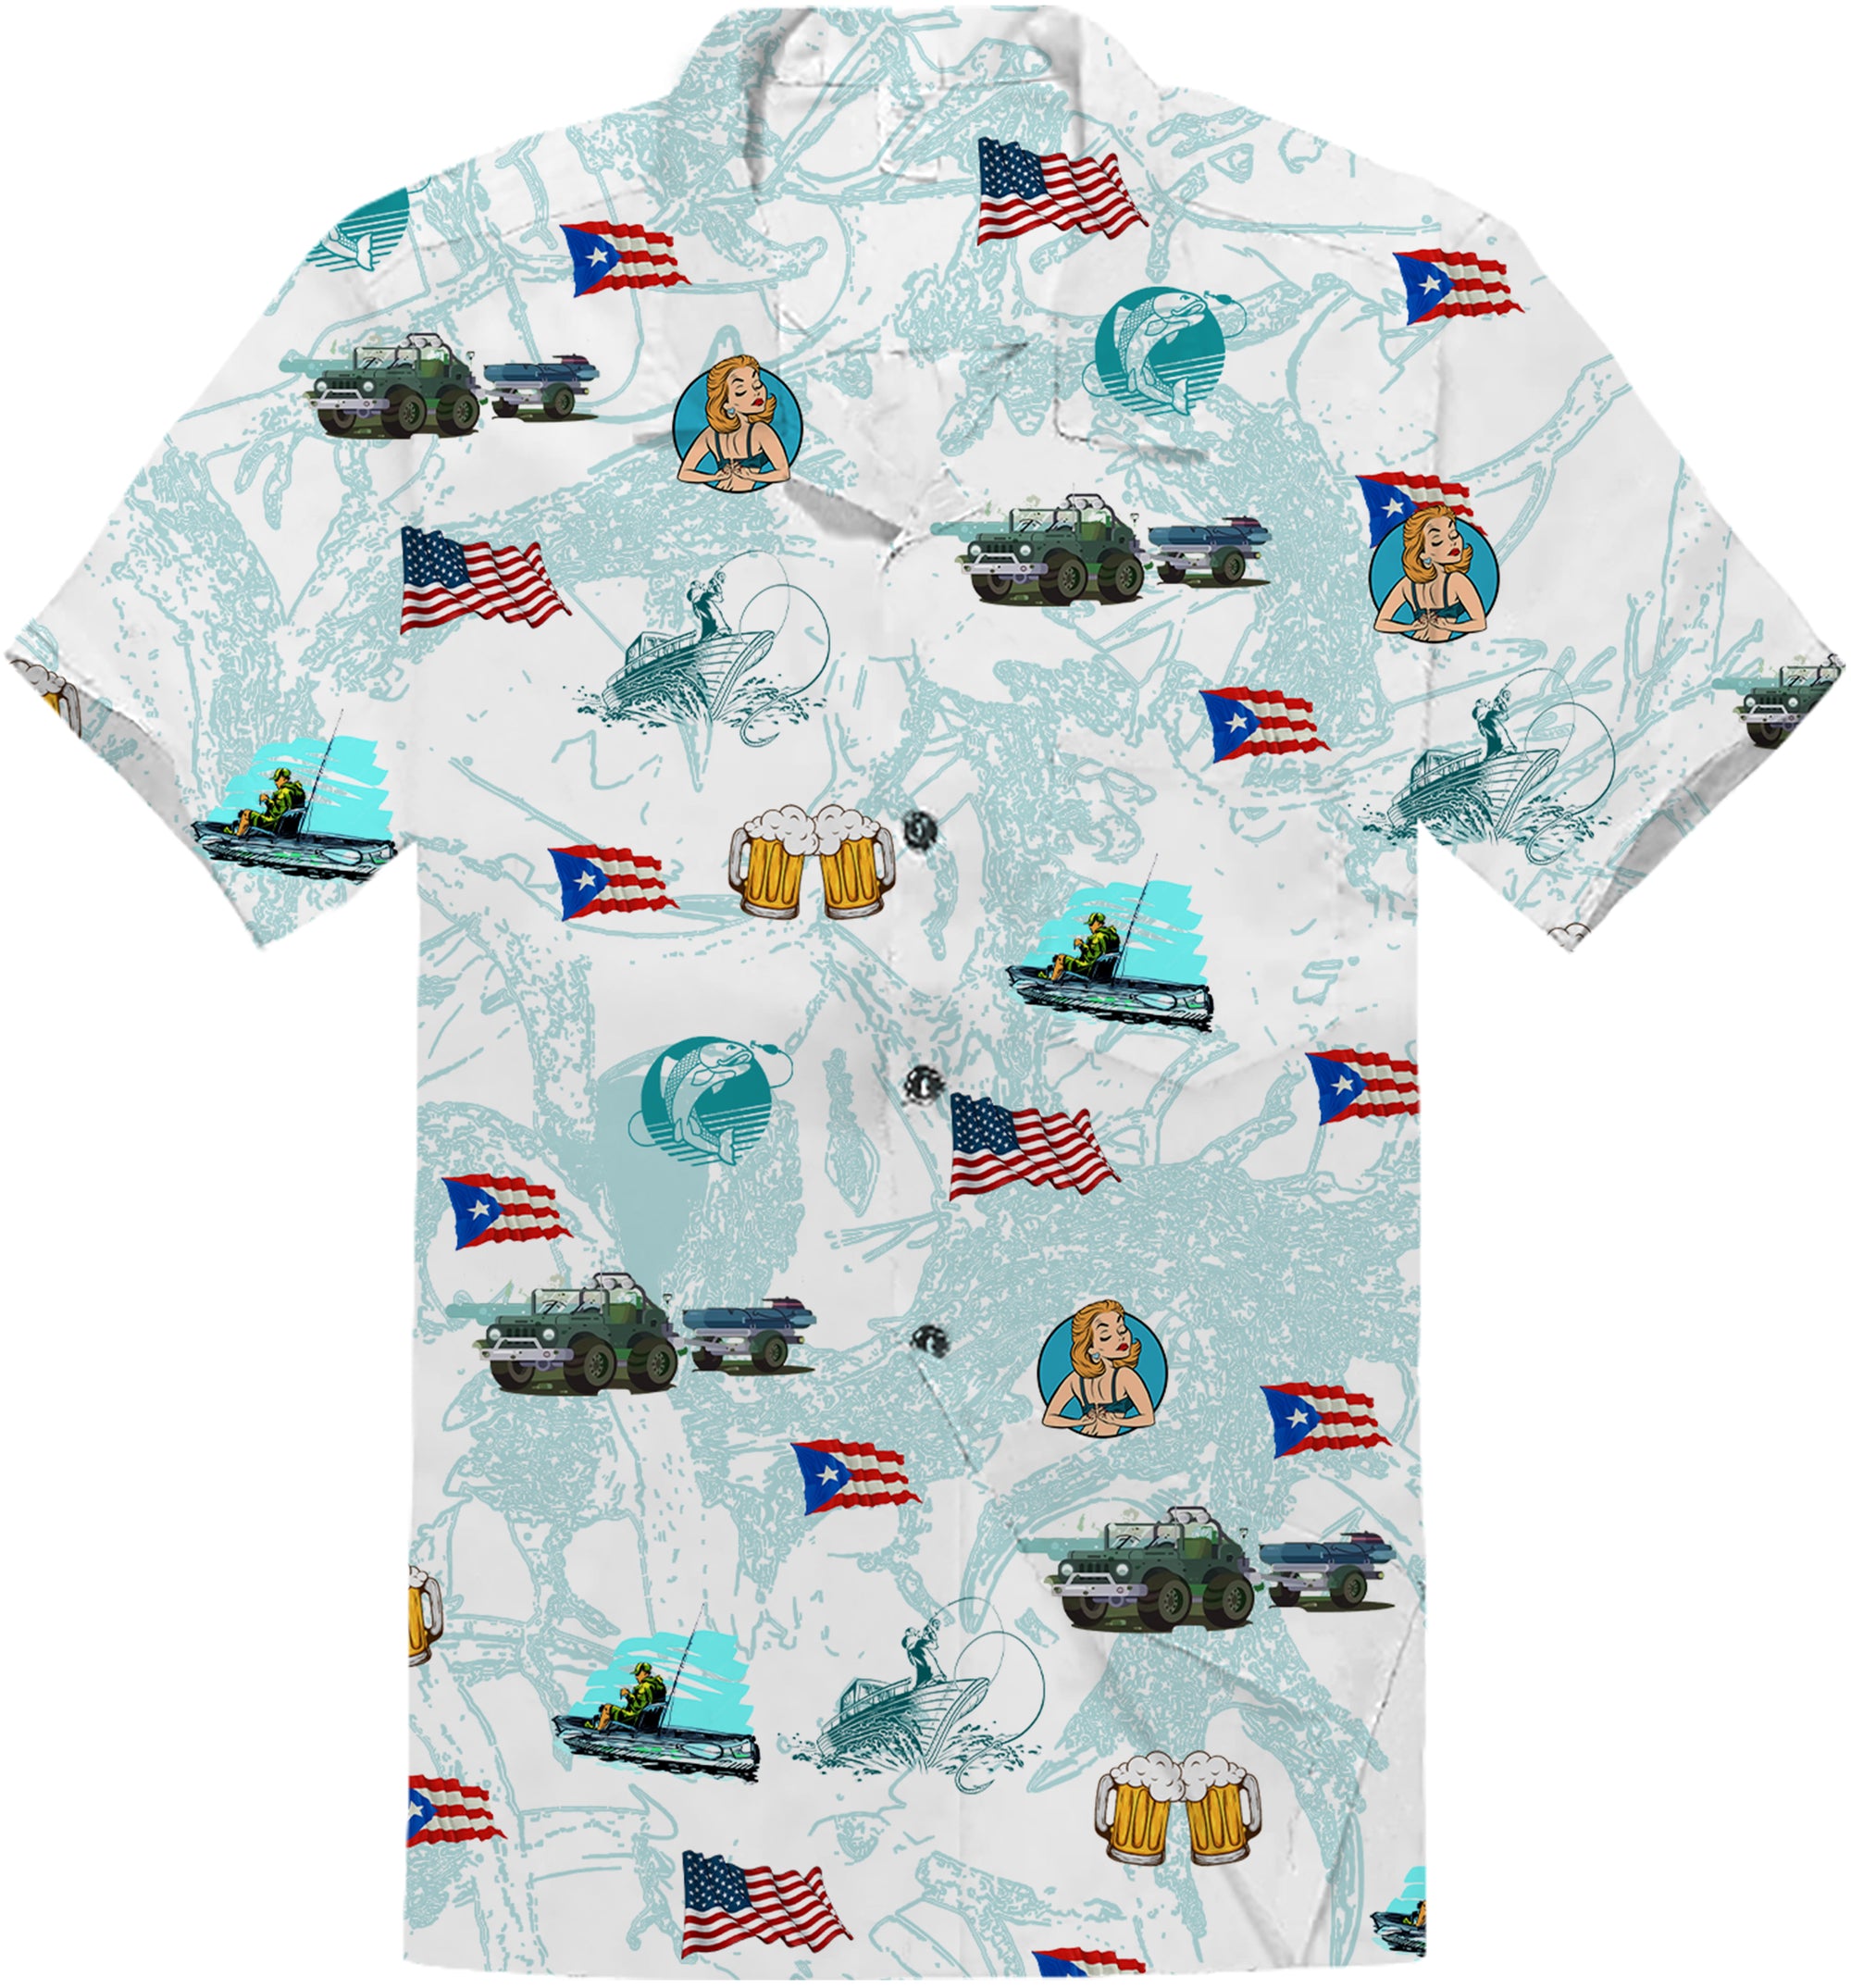 Men's Hawaiian fishing shirt with off-road design. The shirt features a tropical print with fishing boats, palm trees, and waves.